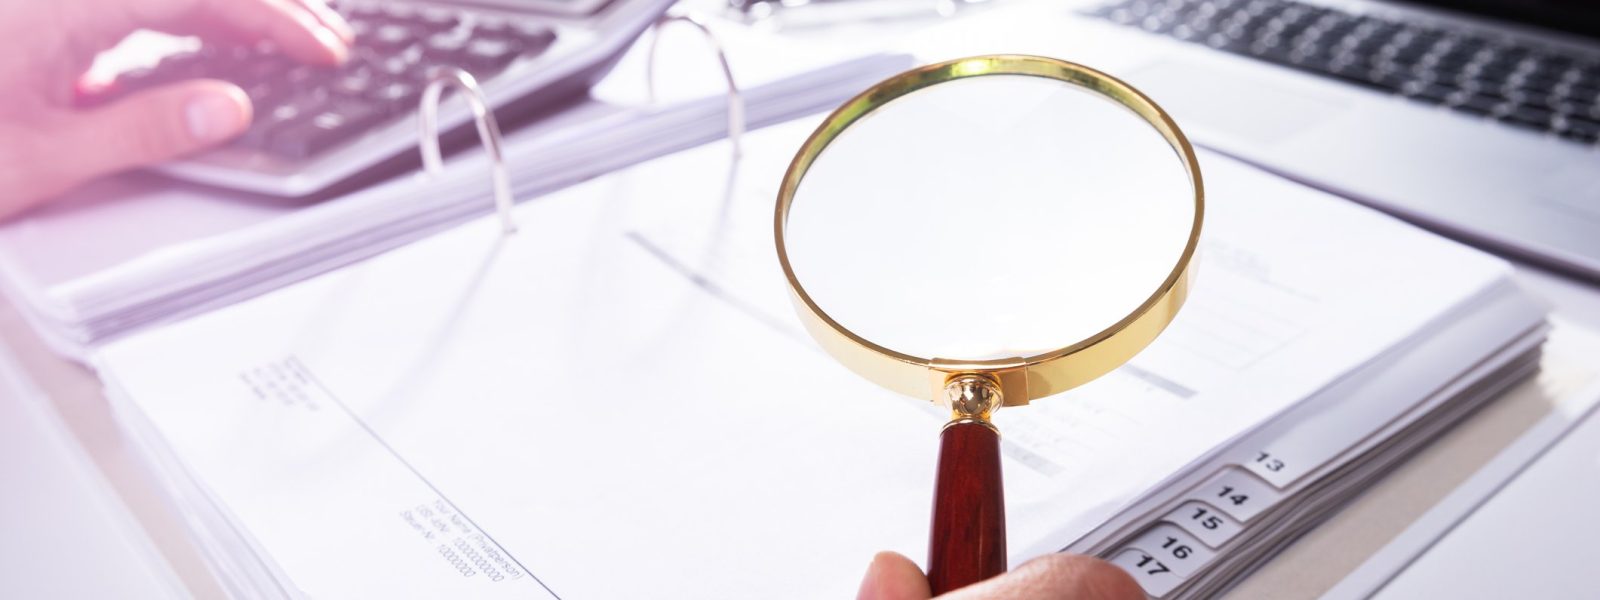 Close-up Of A Businessperson's Hand Analyzing Bill With Magnifying Glass In Office